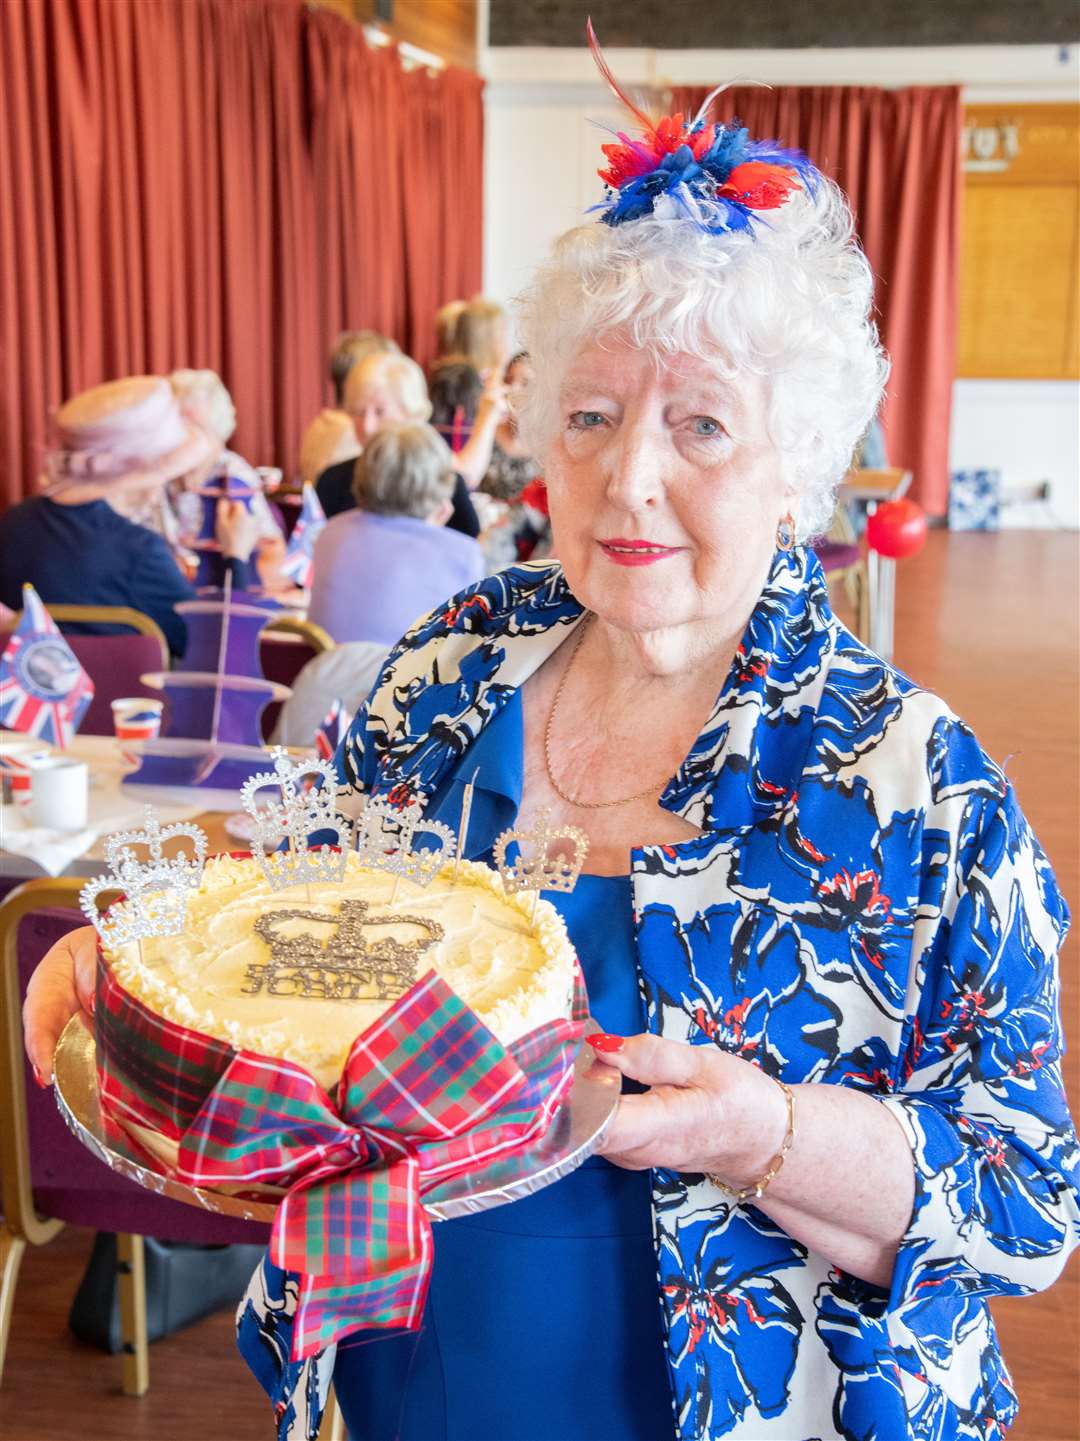 Maureen Menzies shows off the Jubilee cake she made for the occasion. Picture: Daniel Forsyth